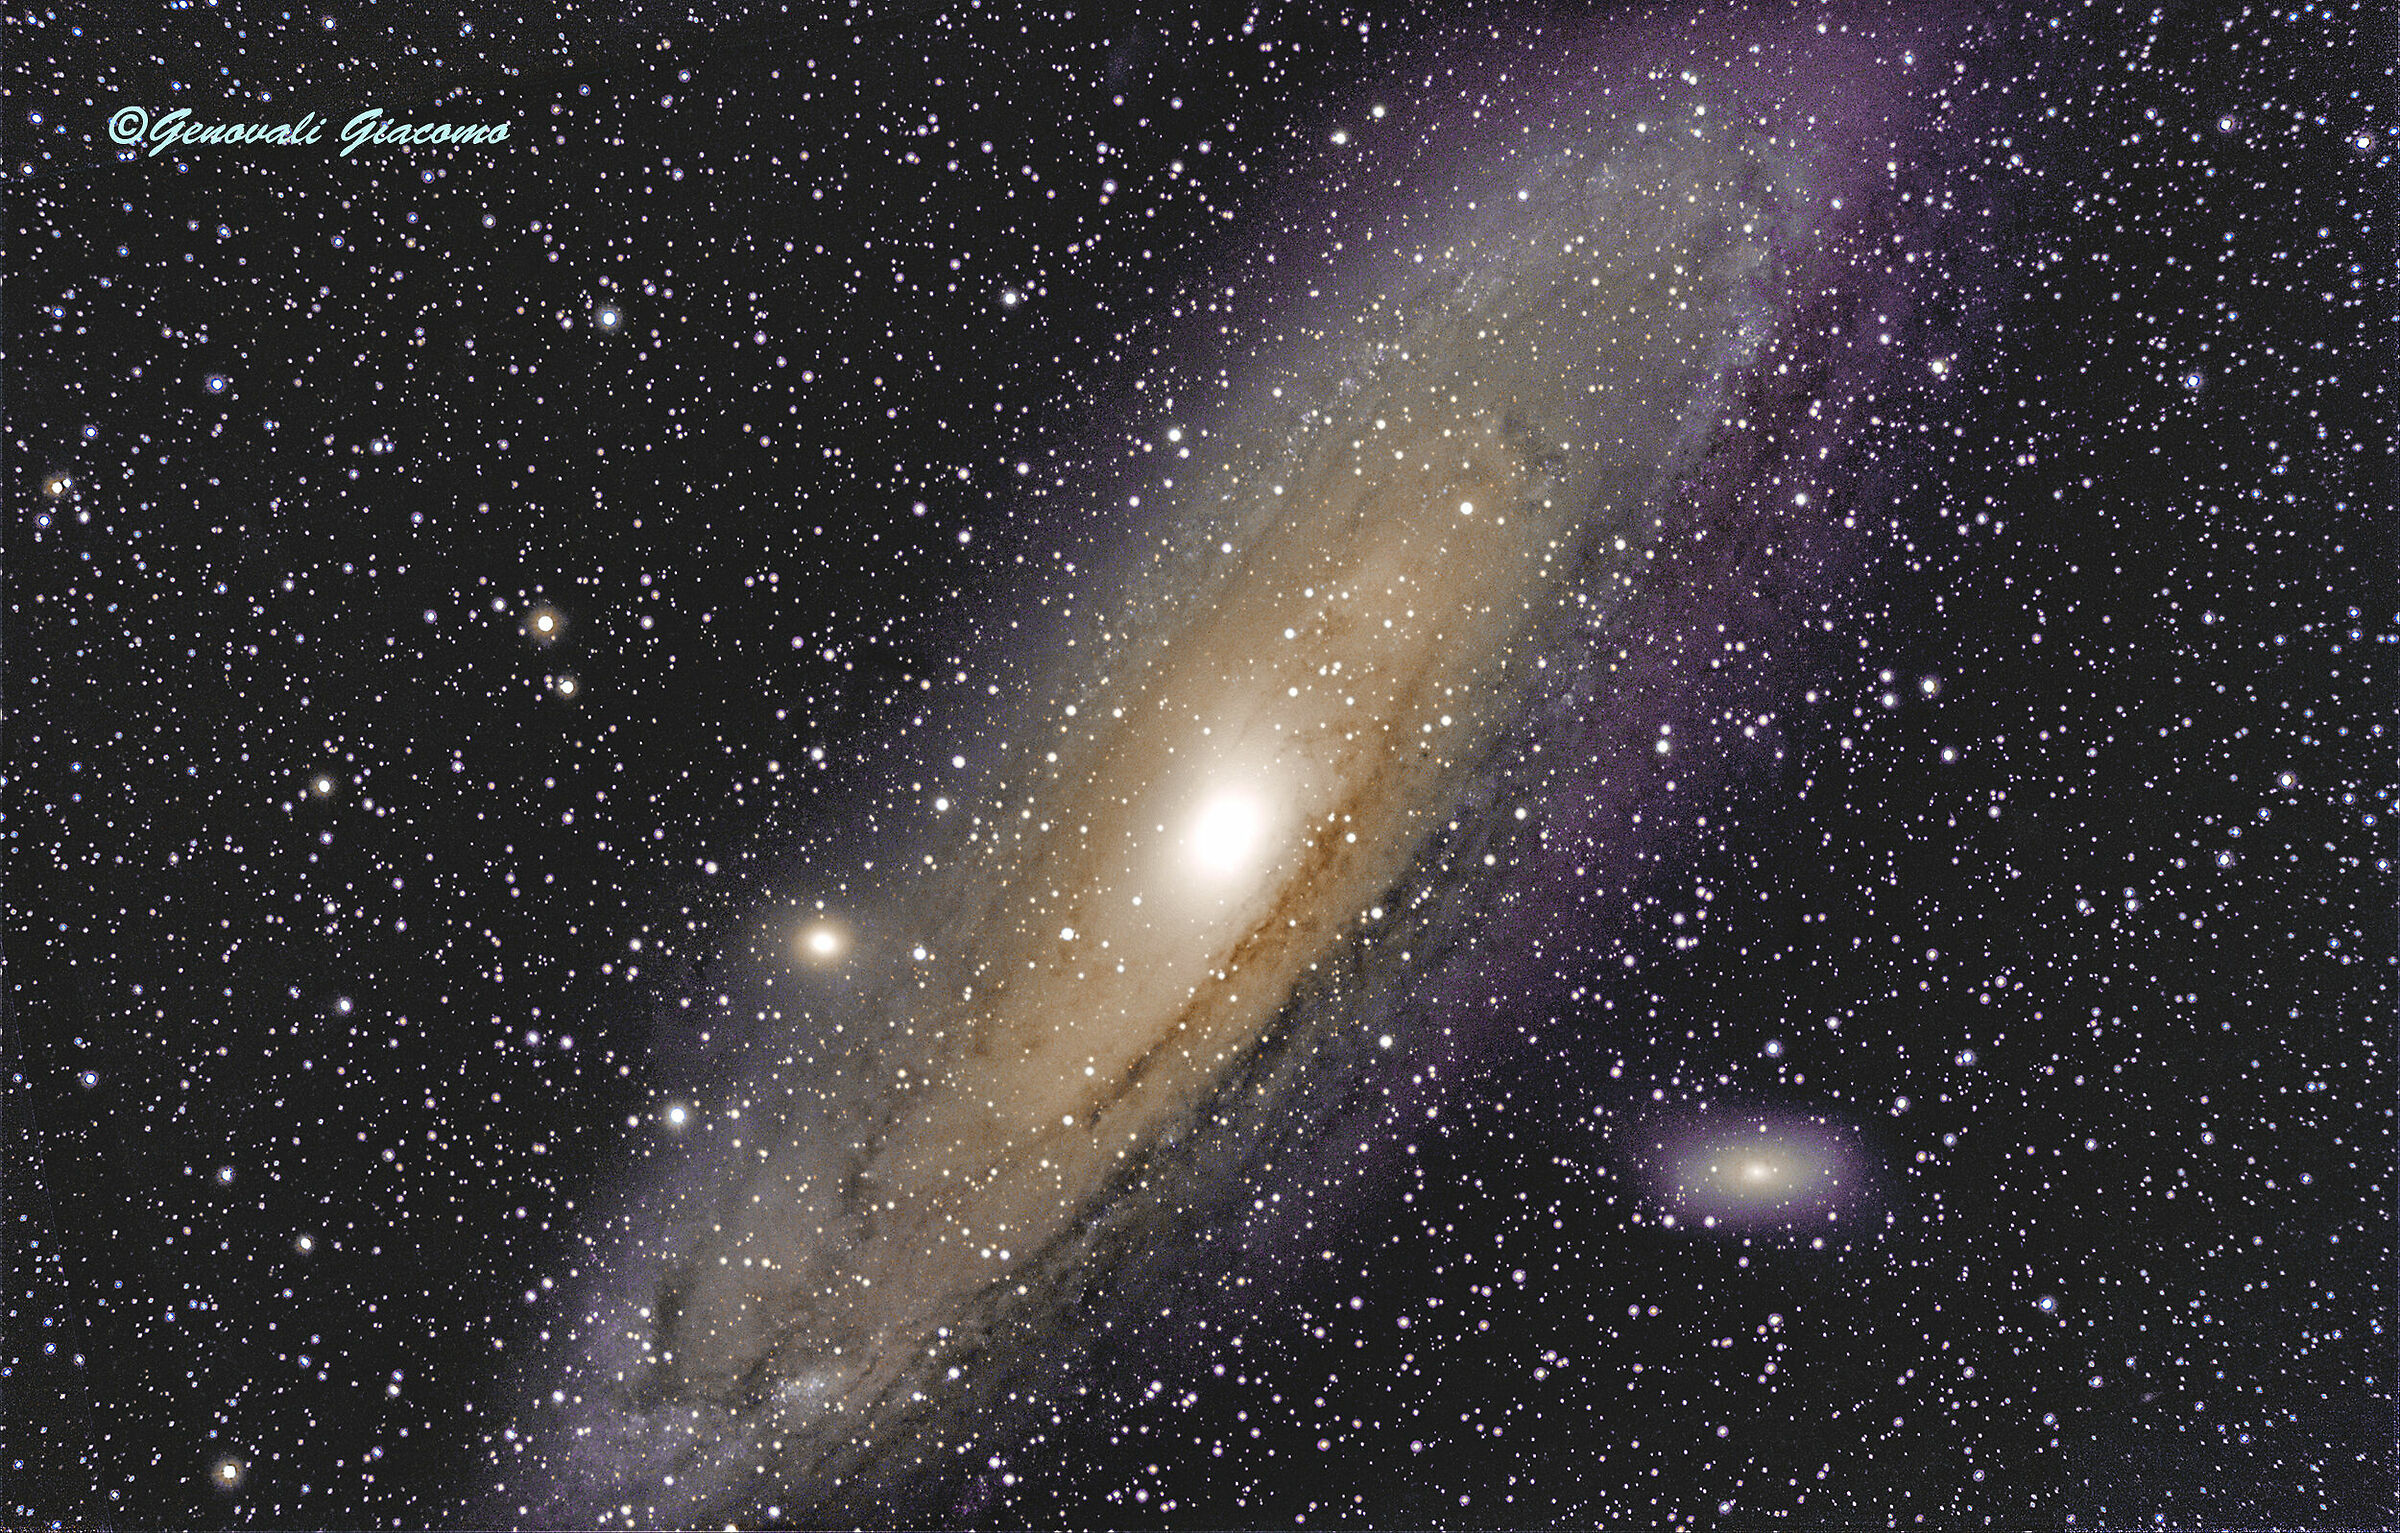 still the queen of galaxies m31...